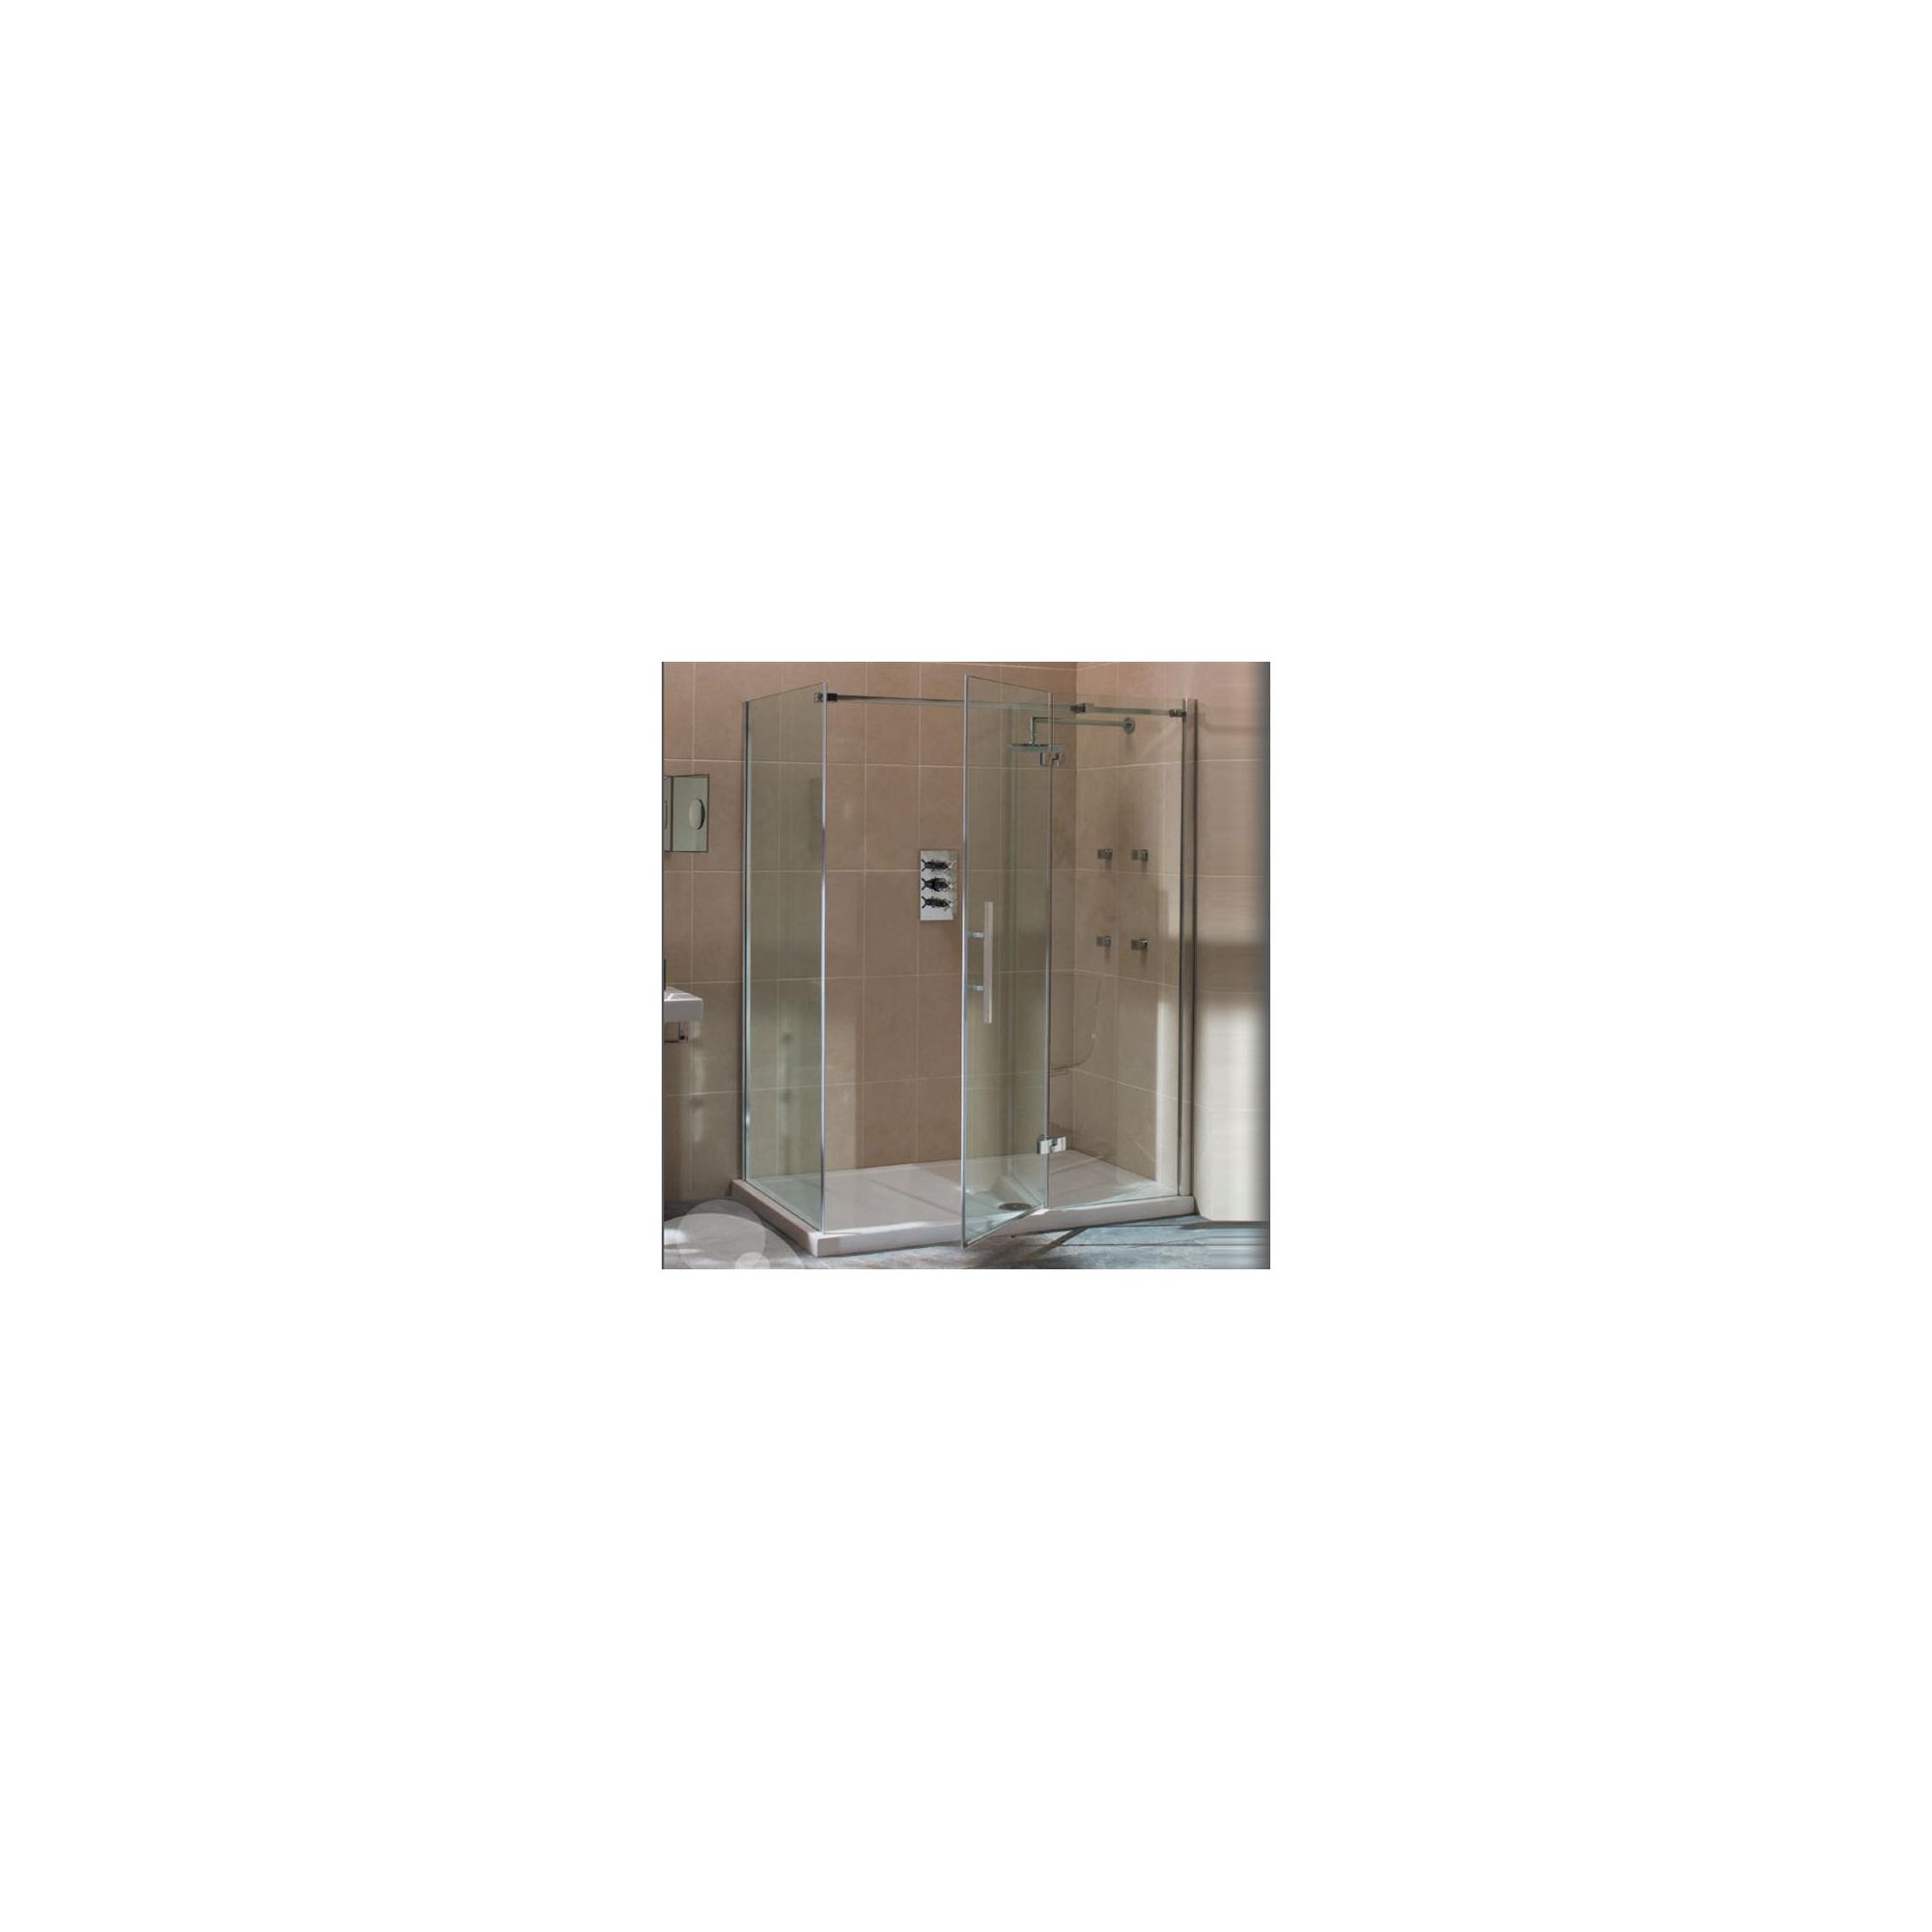 Merlyn Vivid Nine Hinged Door Shower Enclosure with Inline Panel, 1000mm x 800mm, Right Handed, Low Profile Tray, 8mm Glass at Tesco Direct